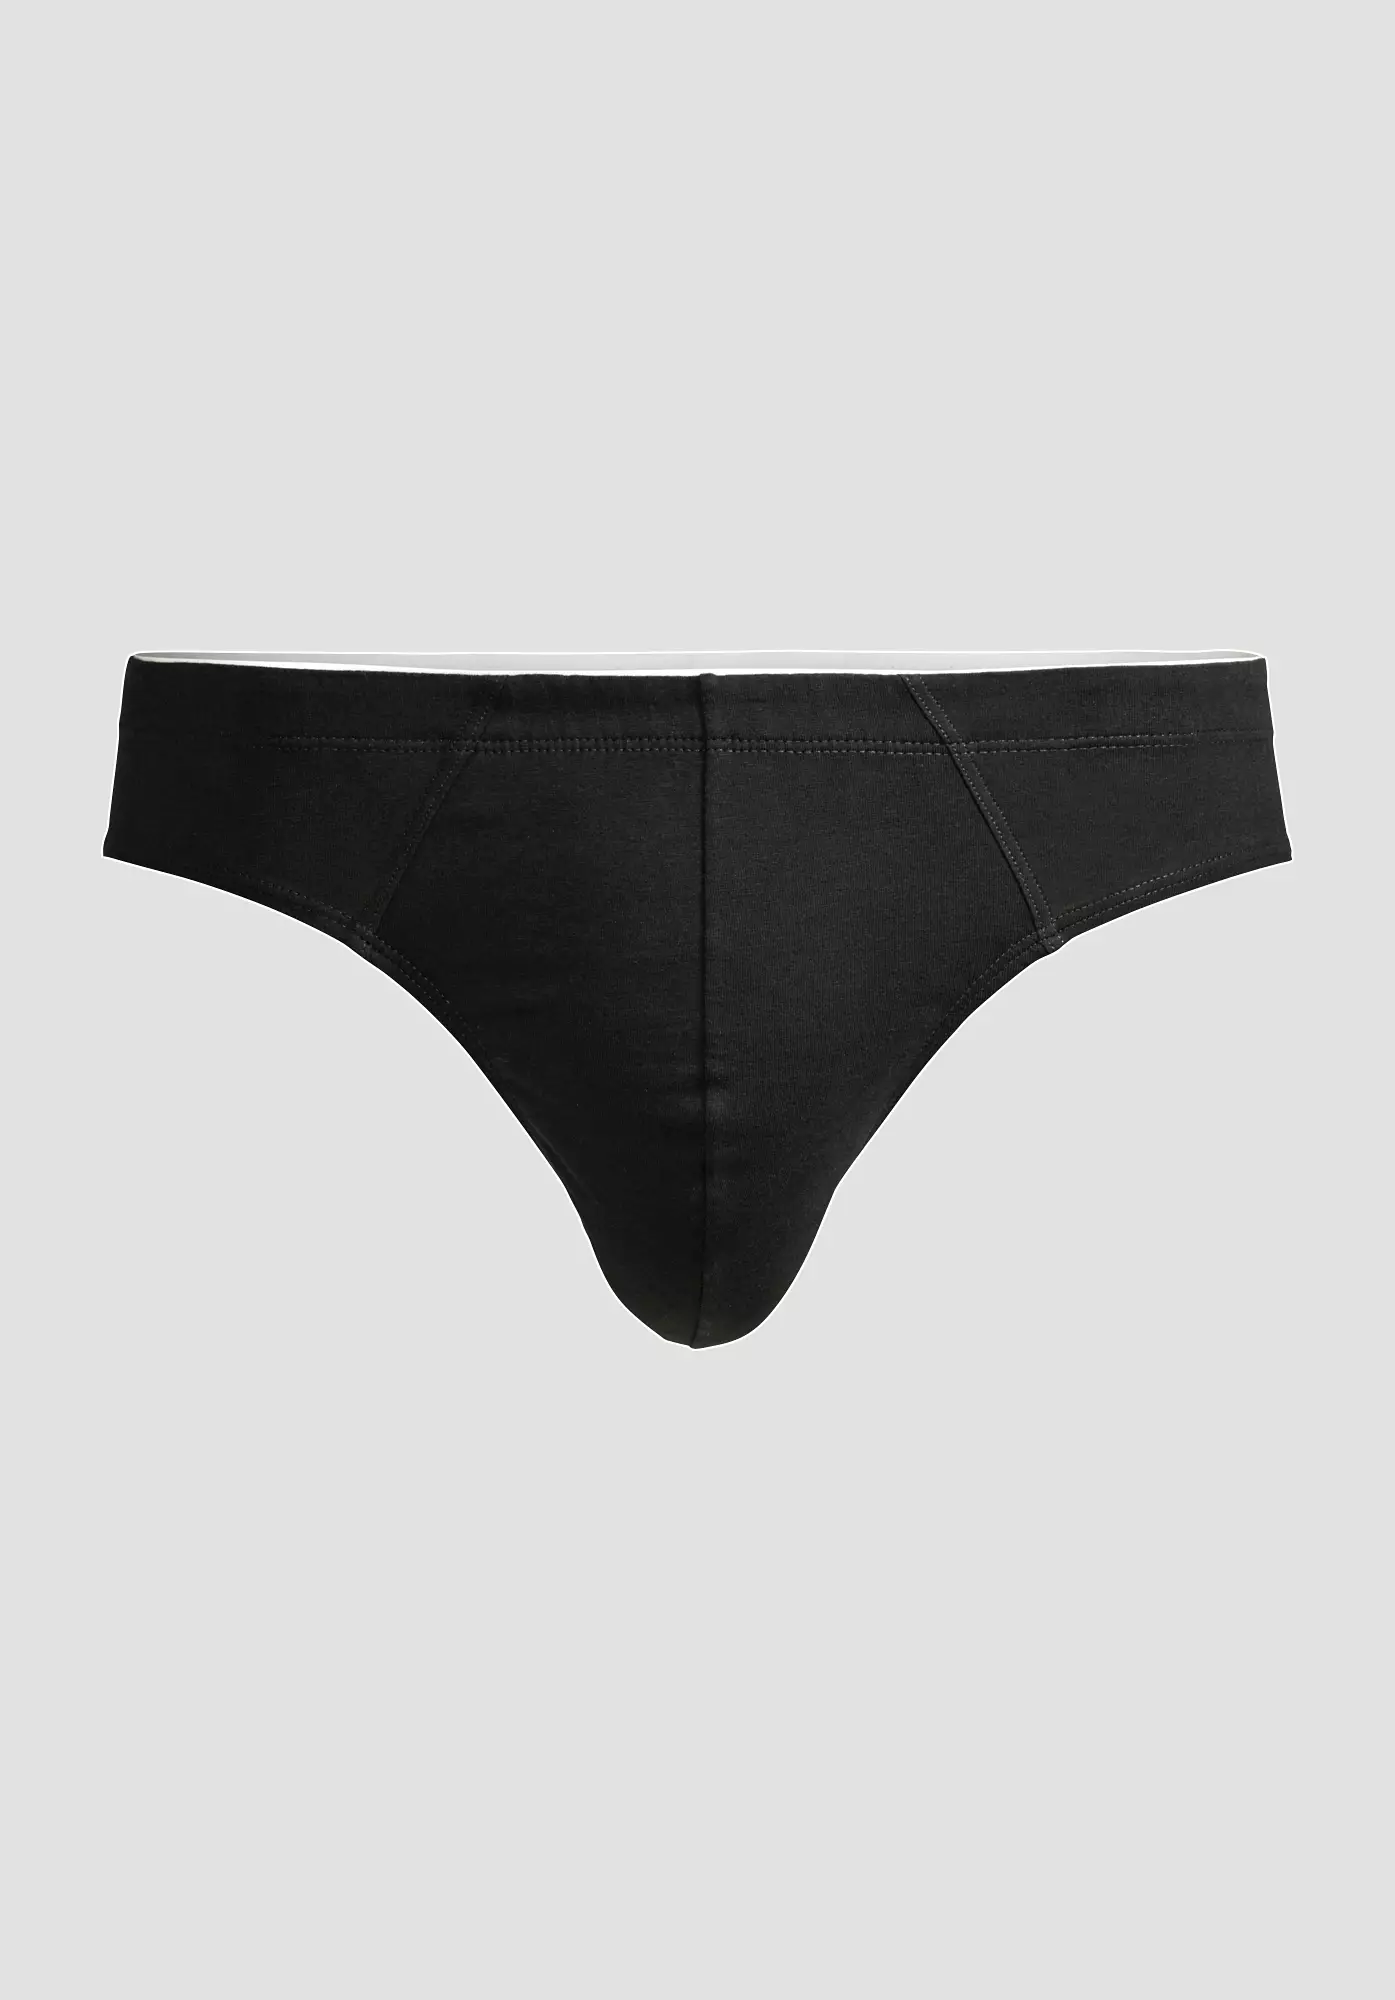 PureLUX briefs in a set of 2 made of organic cotton - 2